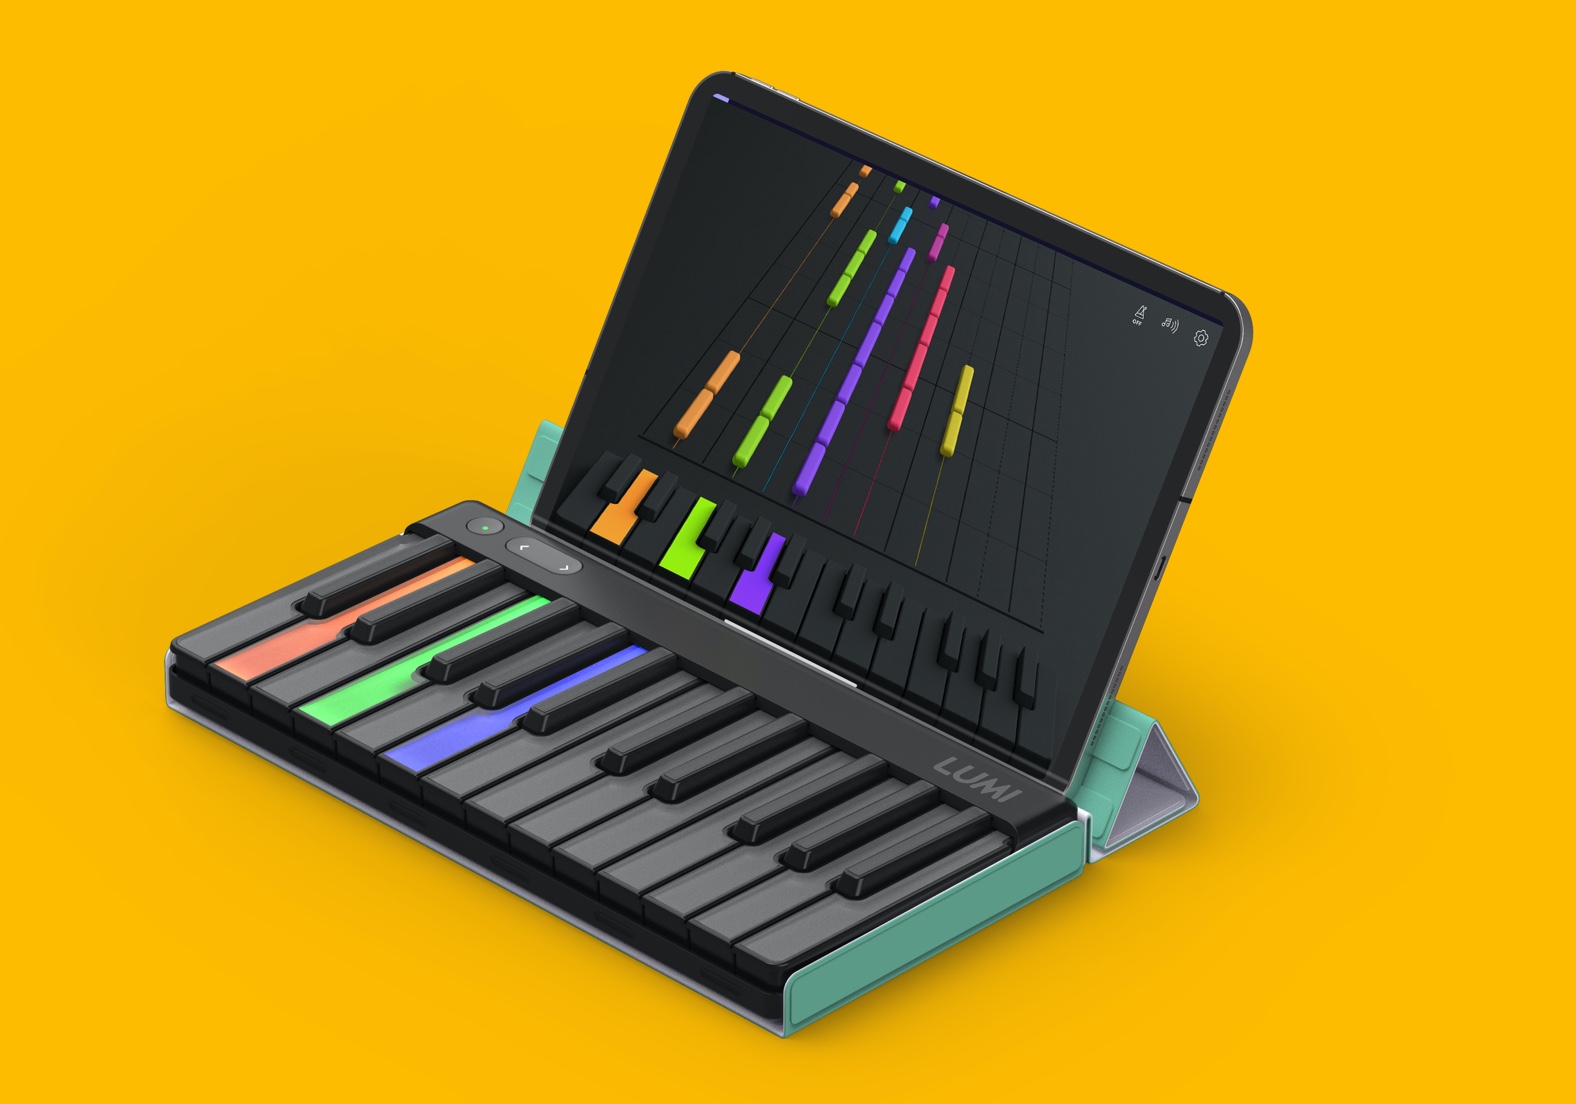 ROLI return with LUMI, a rainbow keyboard that makes learning bright and fun